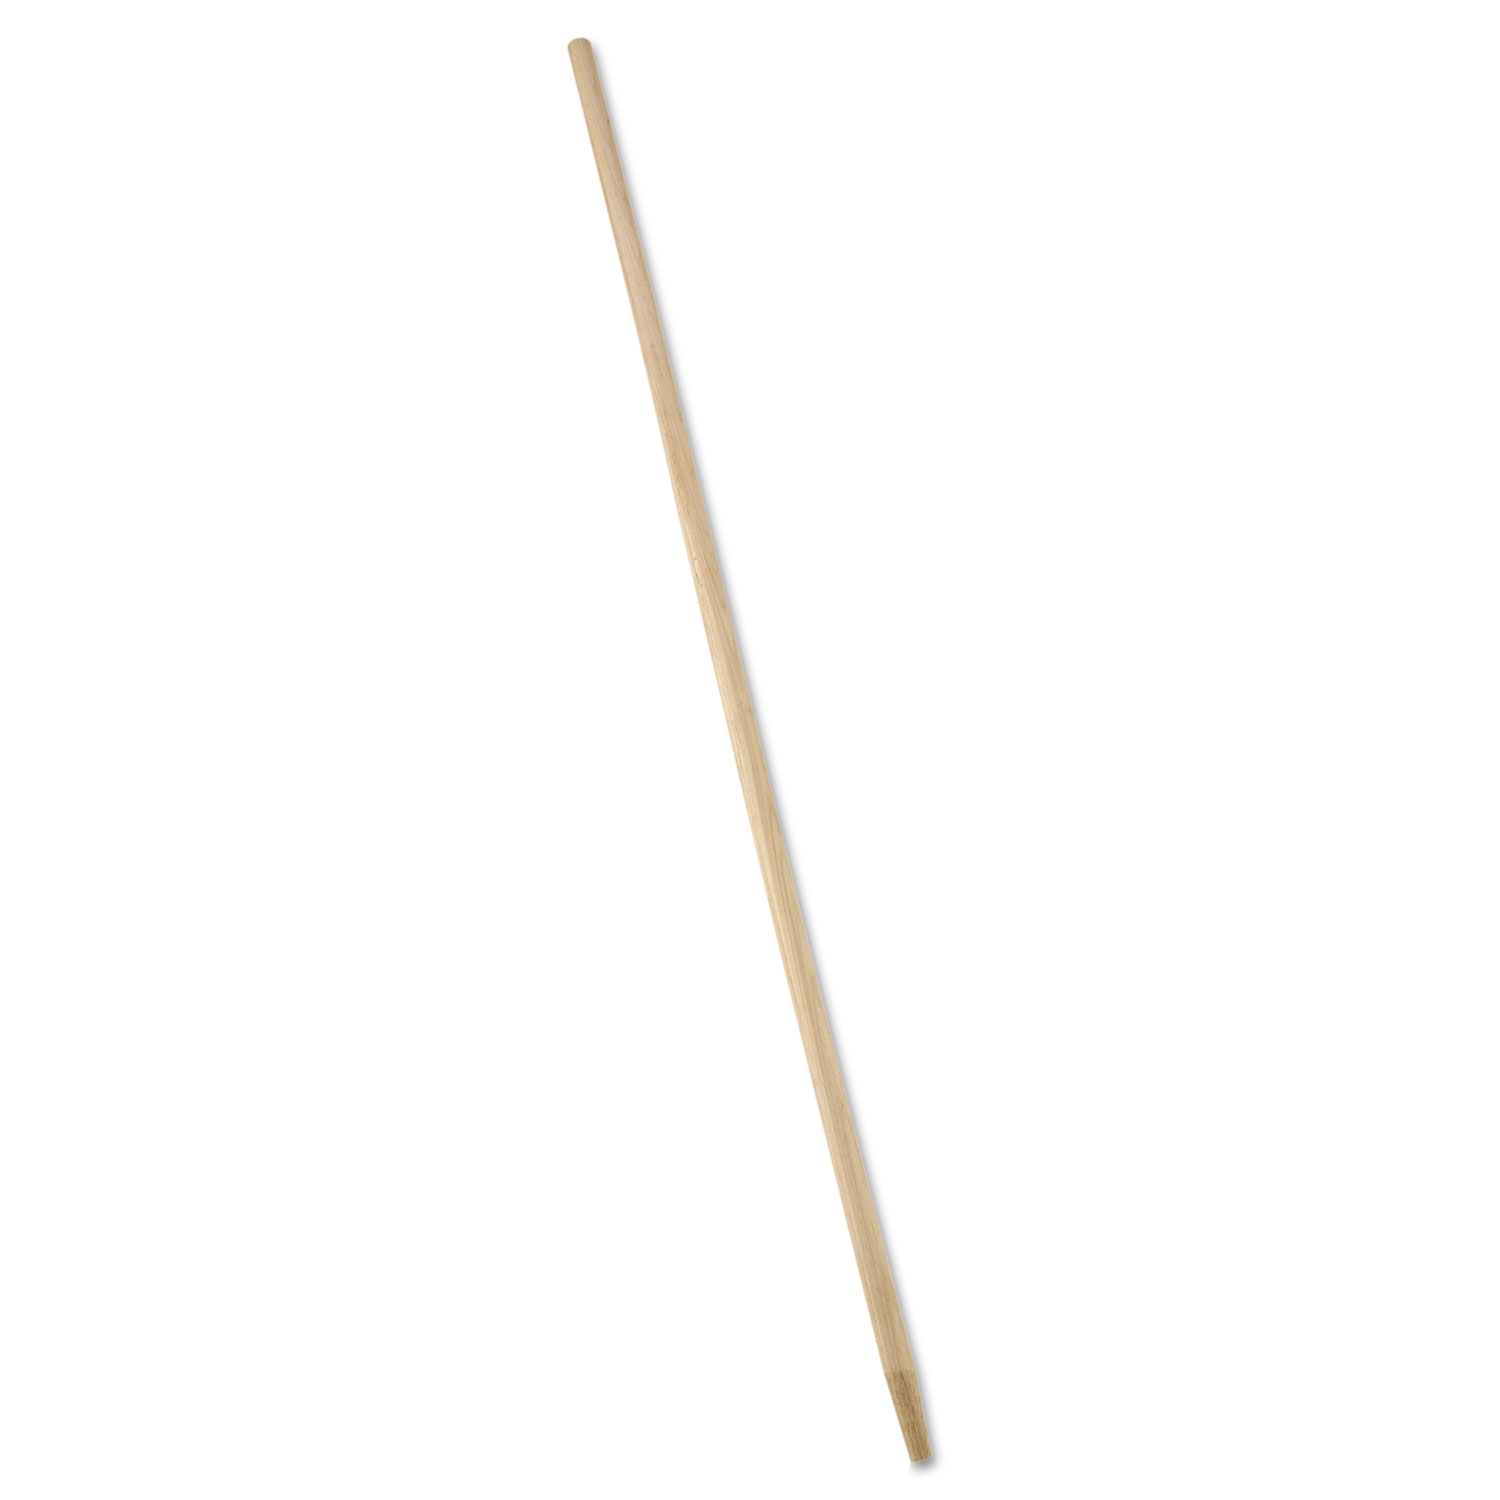  Rubbermaid Commercial FG636200NAT Tapered-Tip Wood Broom/Sweep Handle, 60, Natural (RCP6362) 